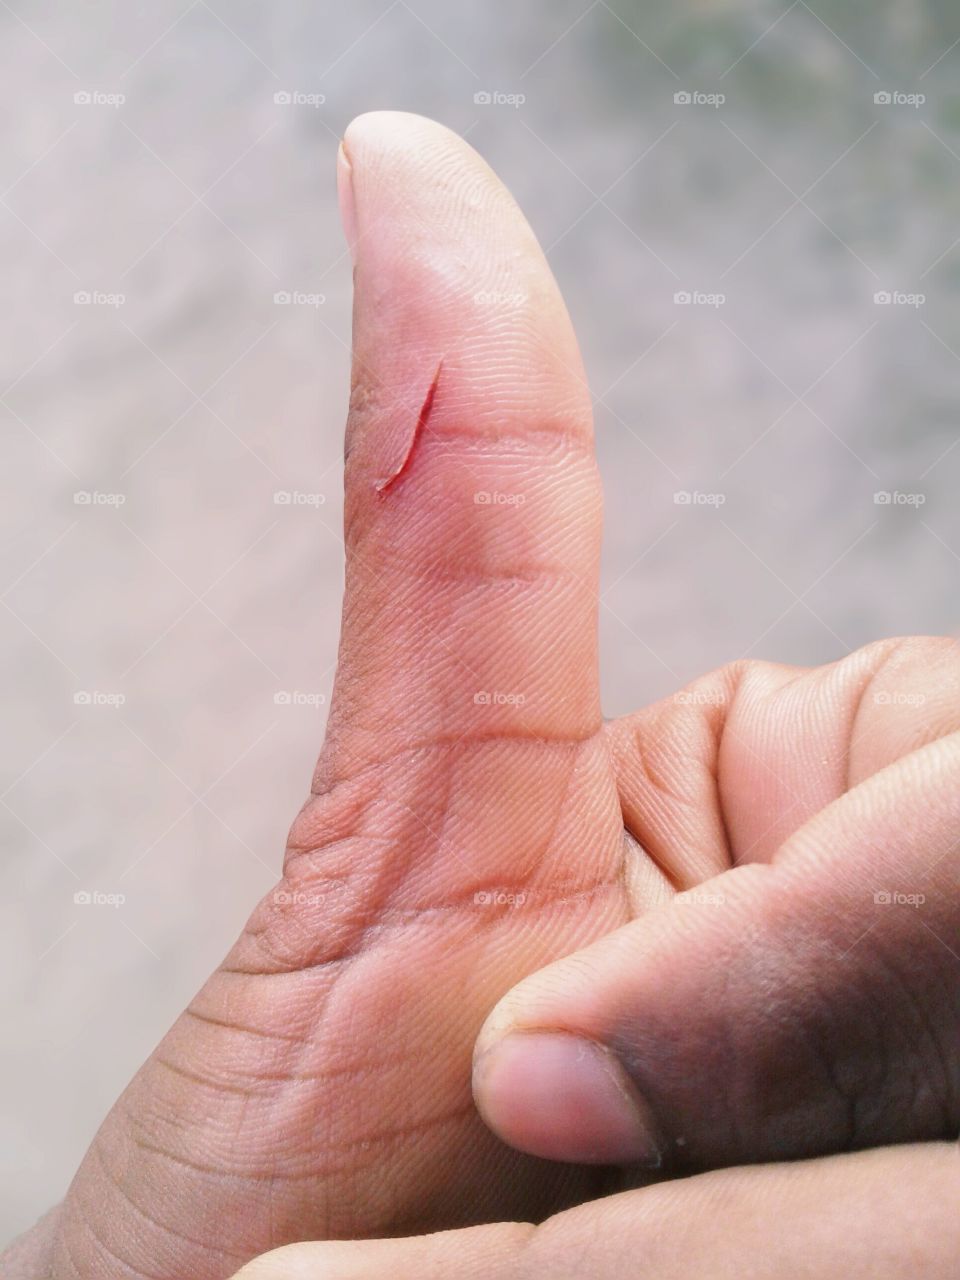 A knife was injured on the thumb of the hand.